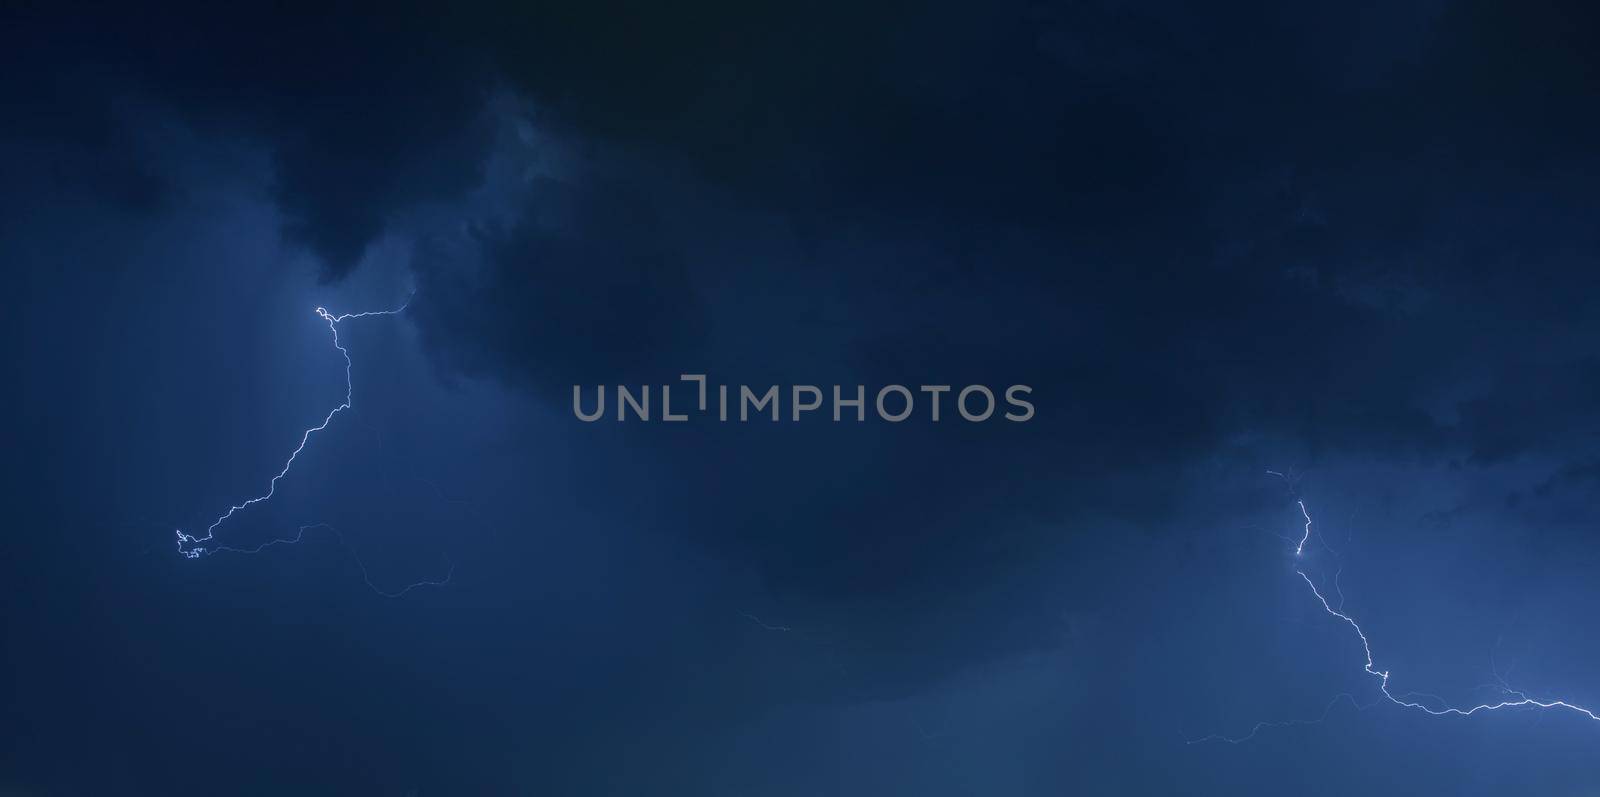 Dark Blue Stormy Sky Photo Background. Weather Photo Collection.